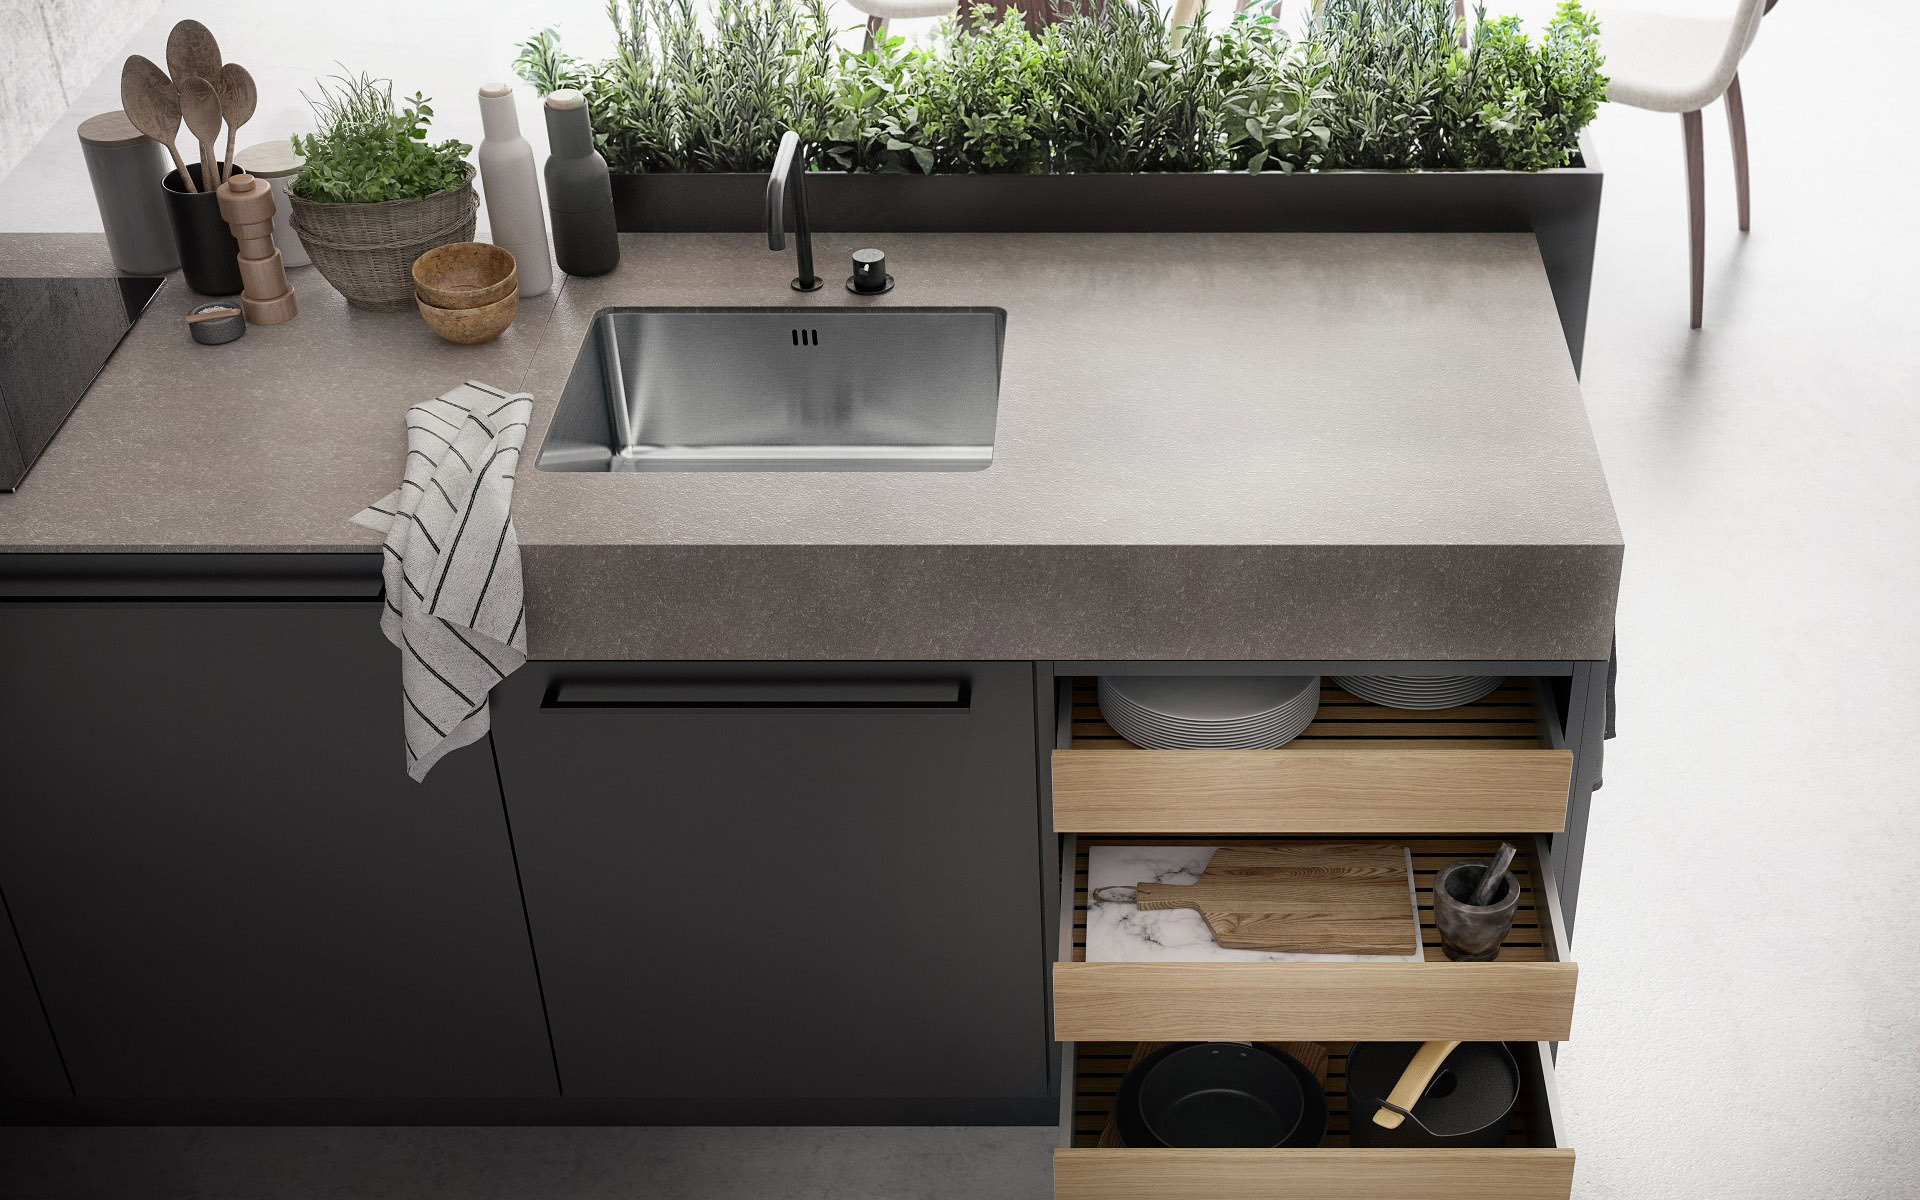 SieMatic Urban SE kitchen island in graphite grey with herb garden and SieMatic StoneDesign countertop